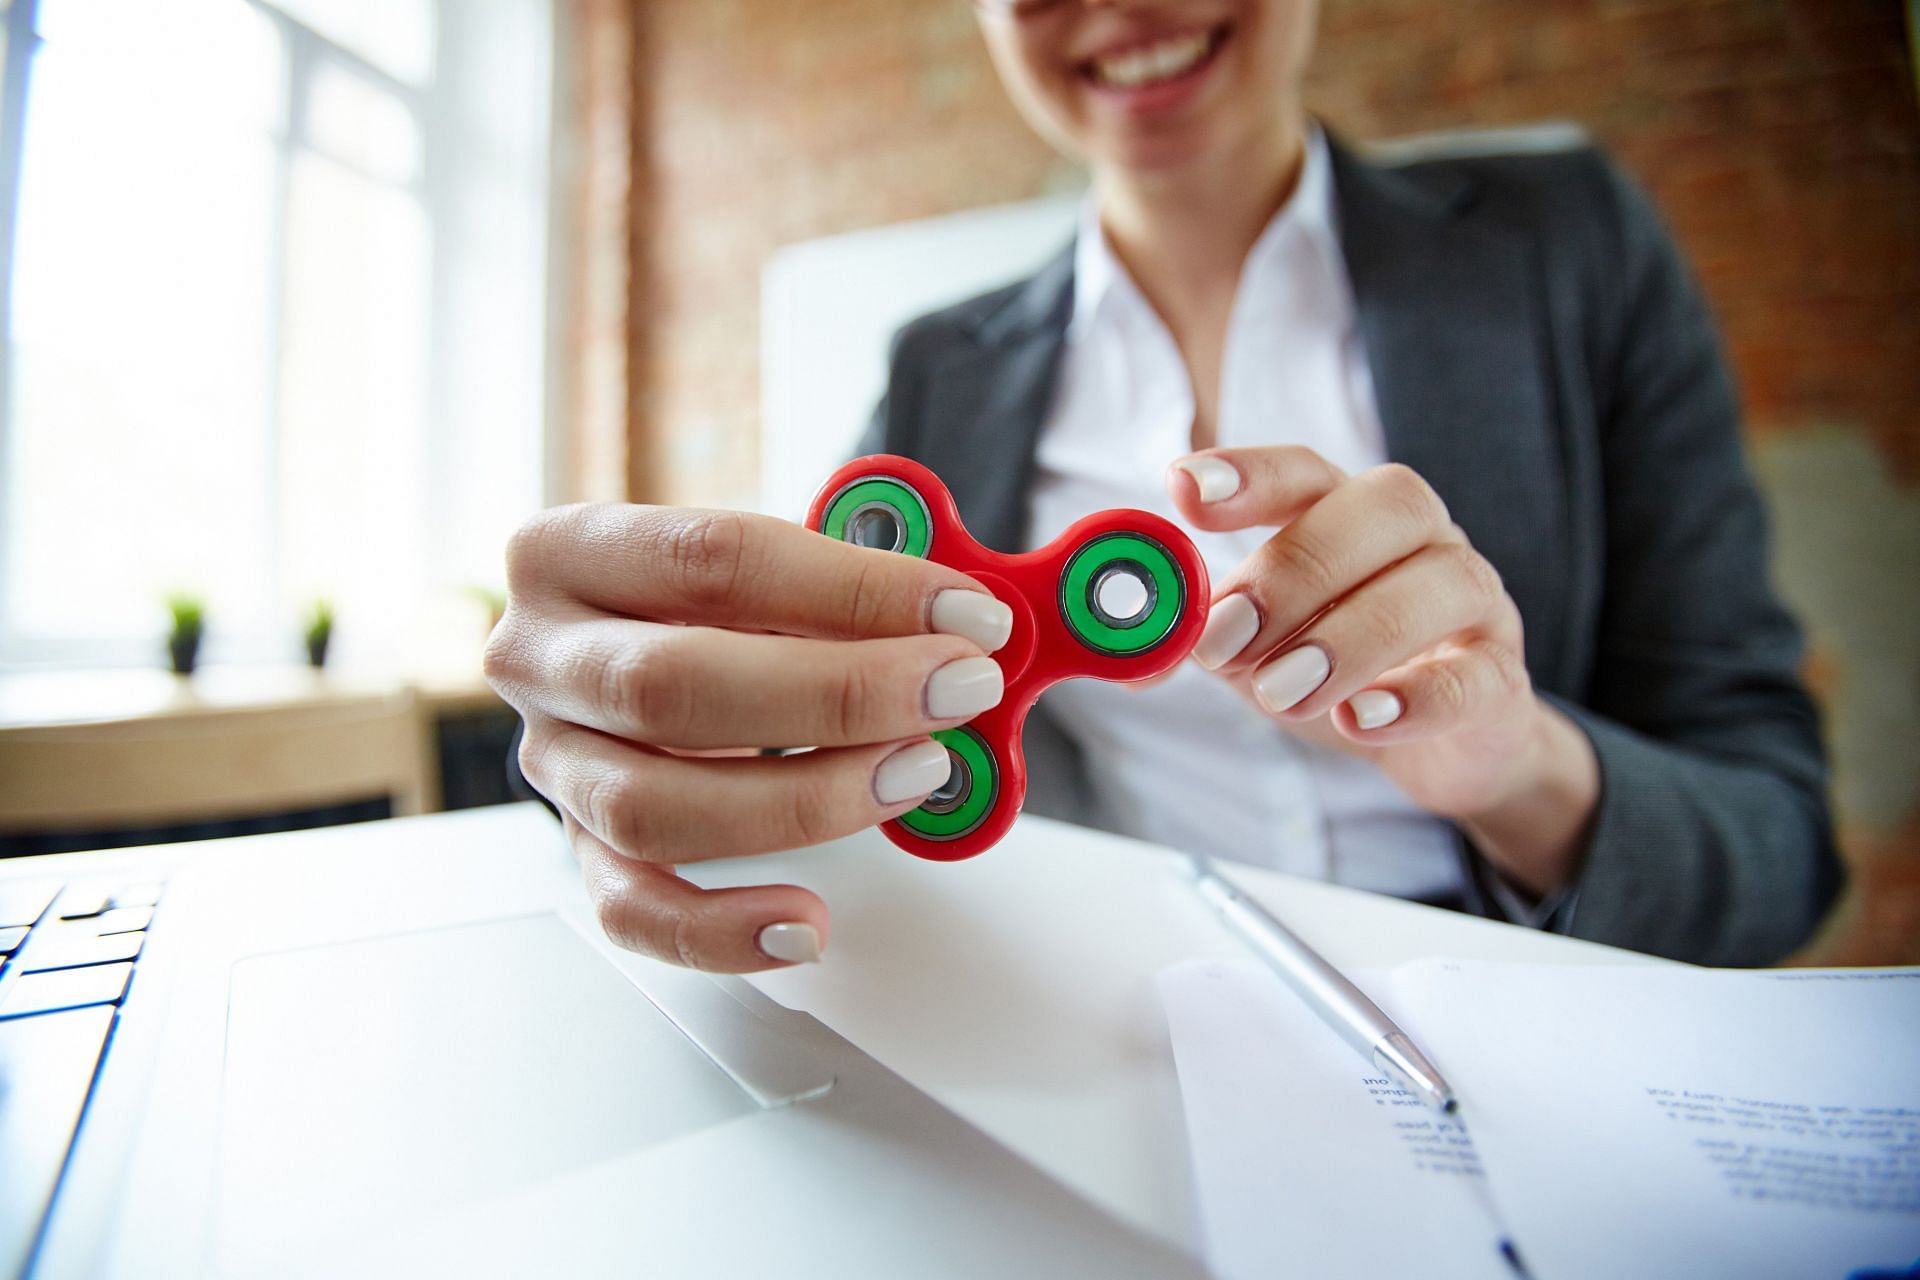 Many people use spinners as a way of relaxation. (Image via Getty)